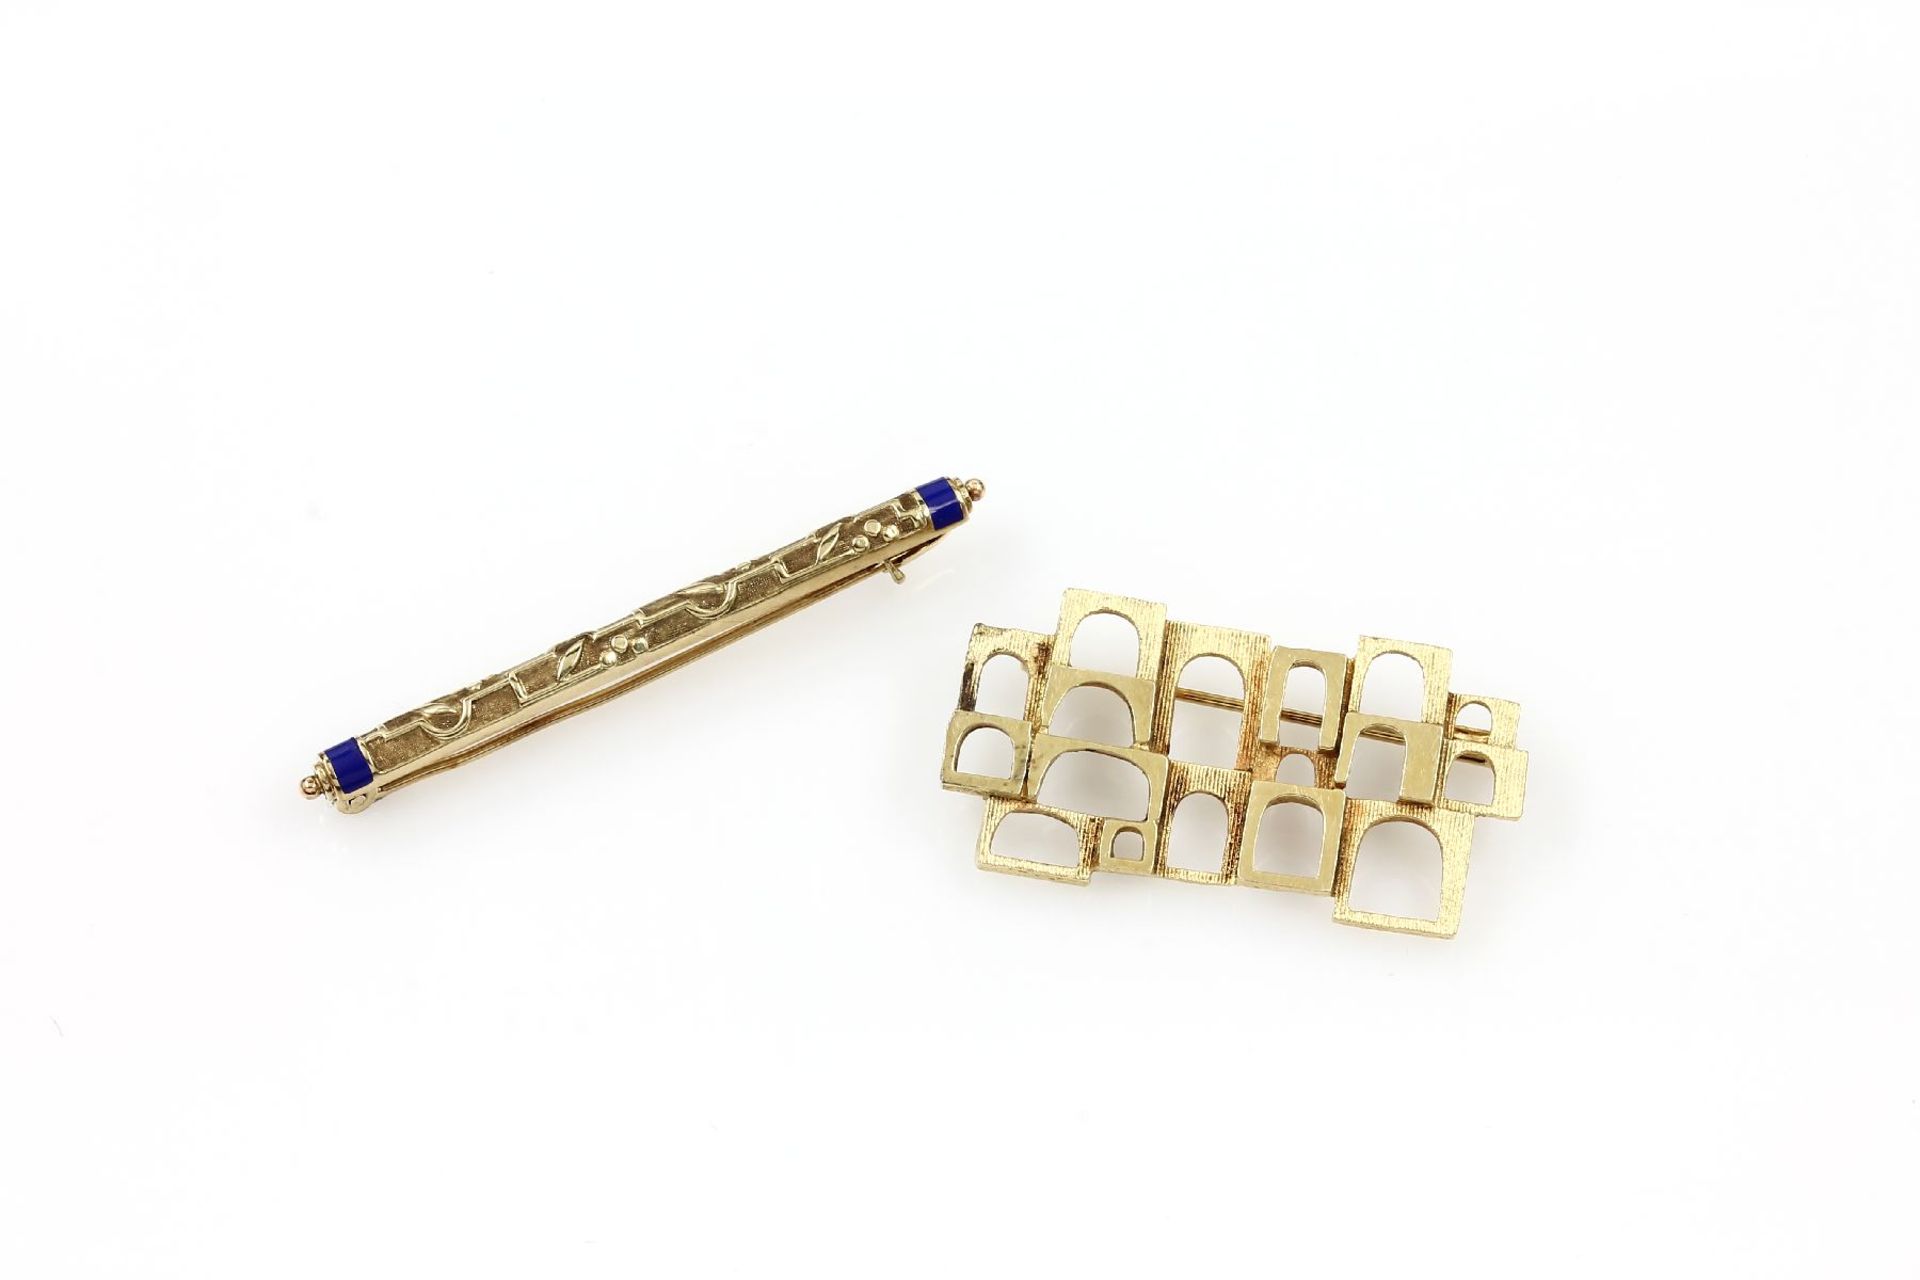 Lot 2 14 kt gold brooches , YG 585/000, 1 x asymm. grid, mattfinished and polished, 1 x bar brooch